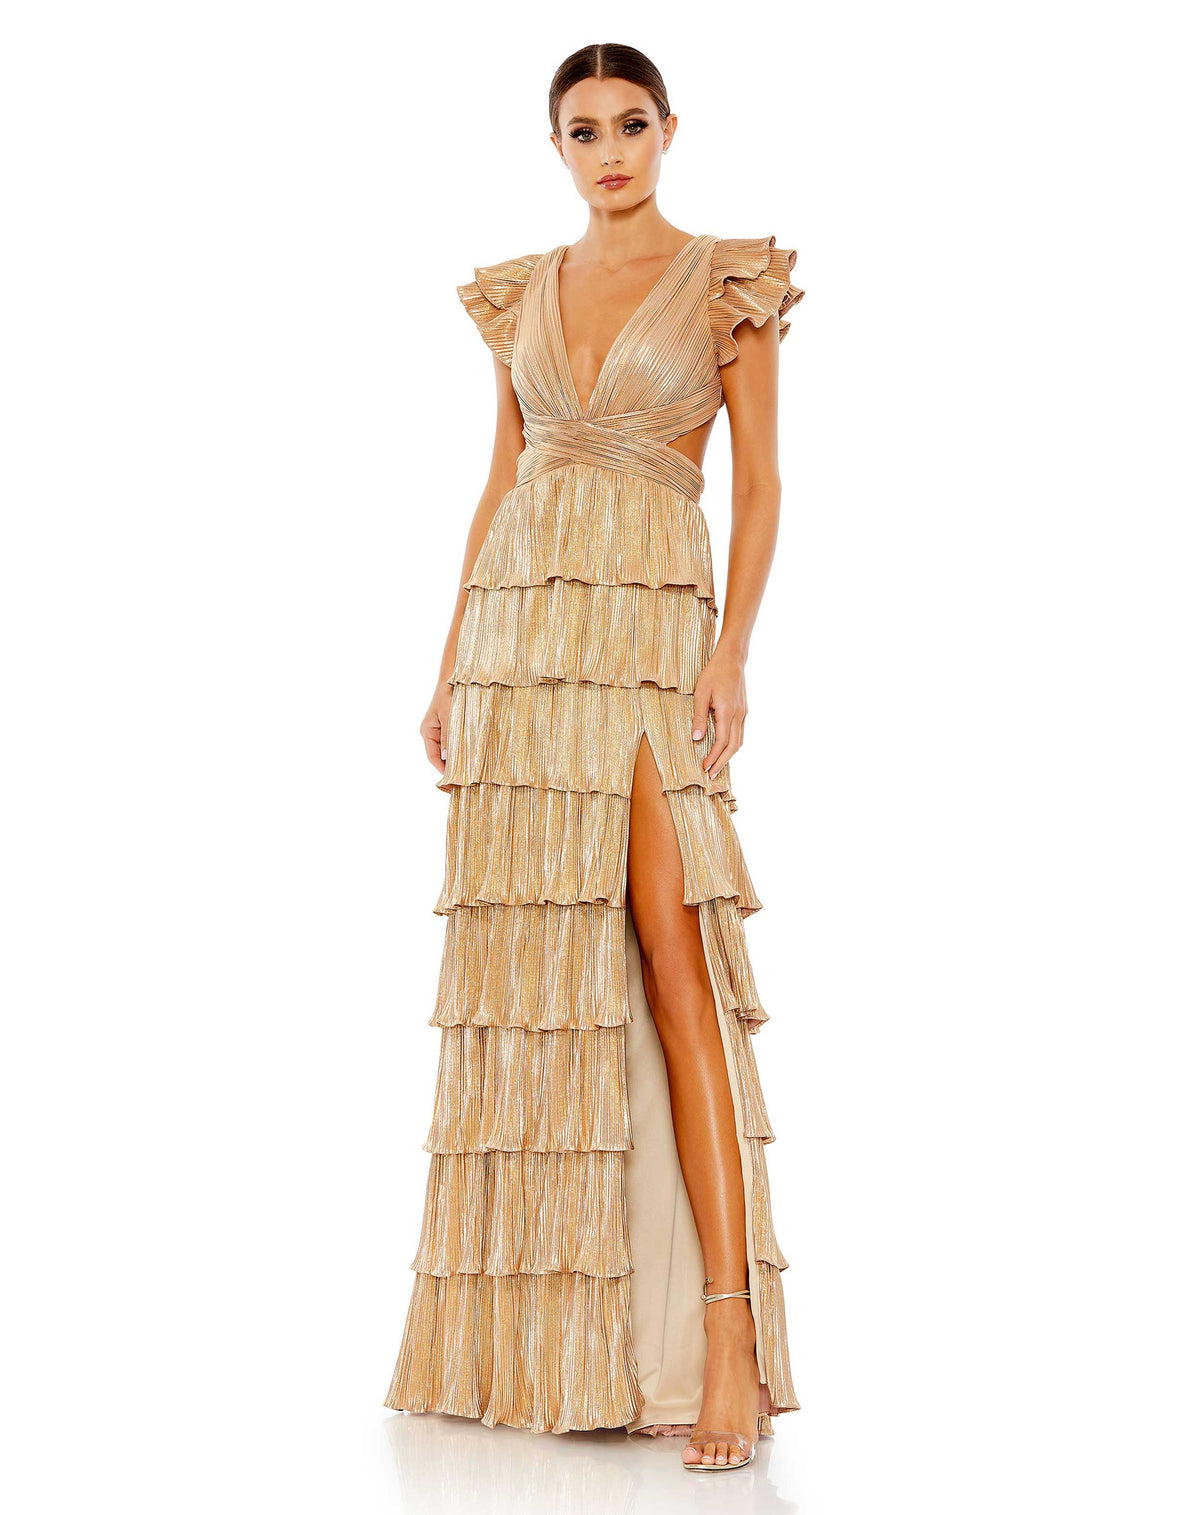 This elegant Mac Duggal, gold, long, short-sleeved, ruffled, gold, tiered dress is perfect for Summer proms and wedding guests! This dress with short ruffled sleeves and a sexy thigh-high split has sexy tie-up detail at the back which make it so very stunning! 